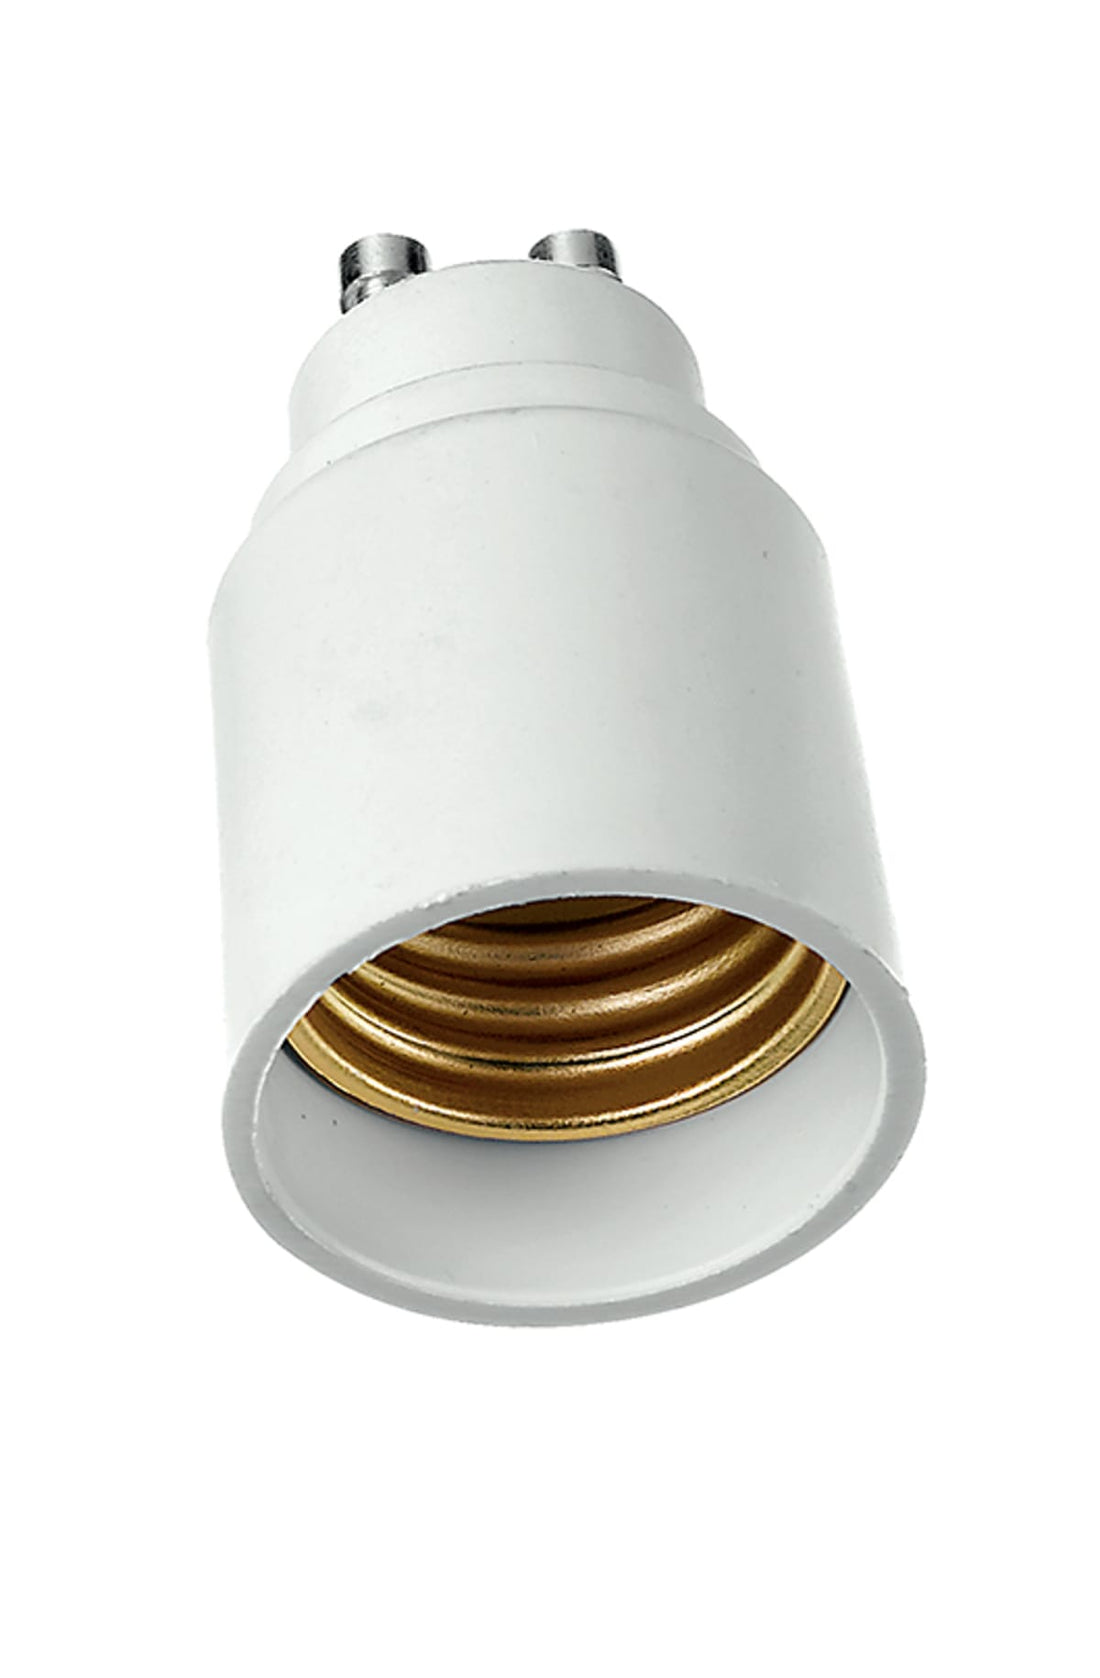 ADAPTER FOR GU10 TO E27 LAMPS